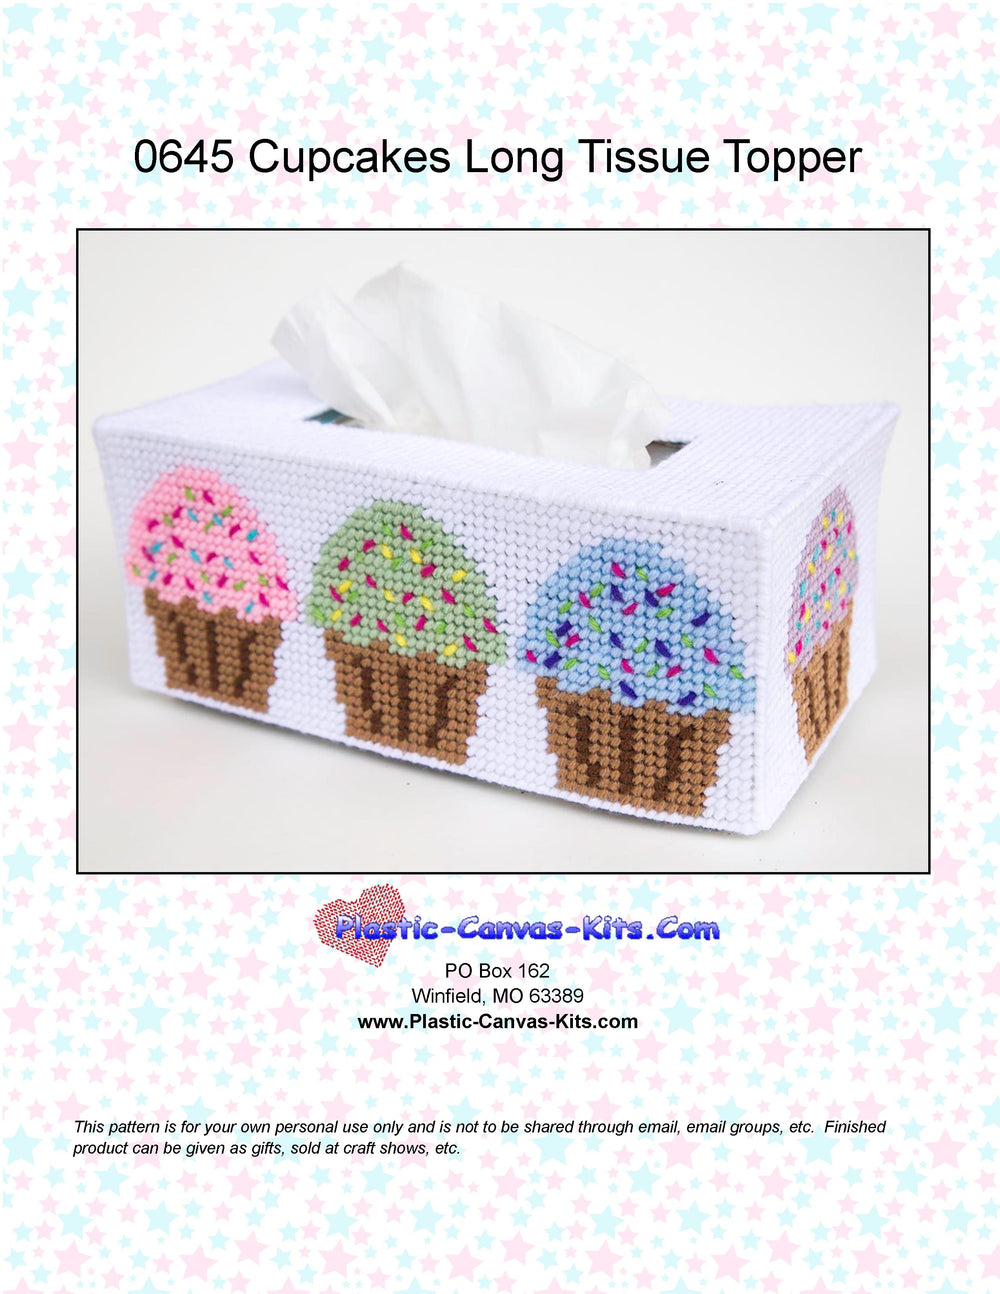 Cupcakes Long Tissue Topper